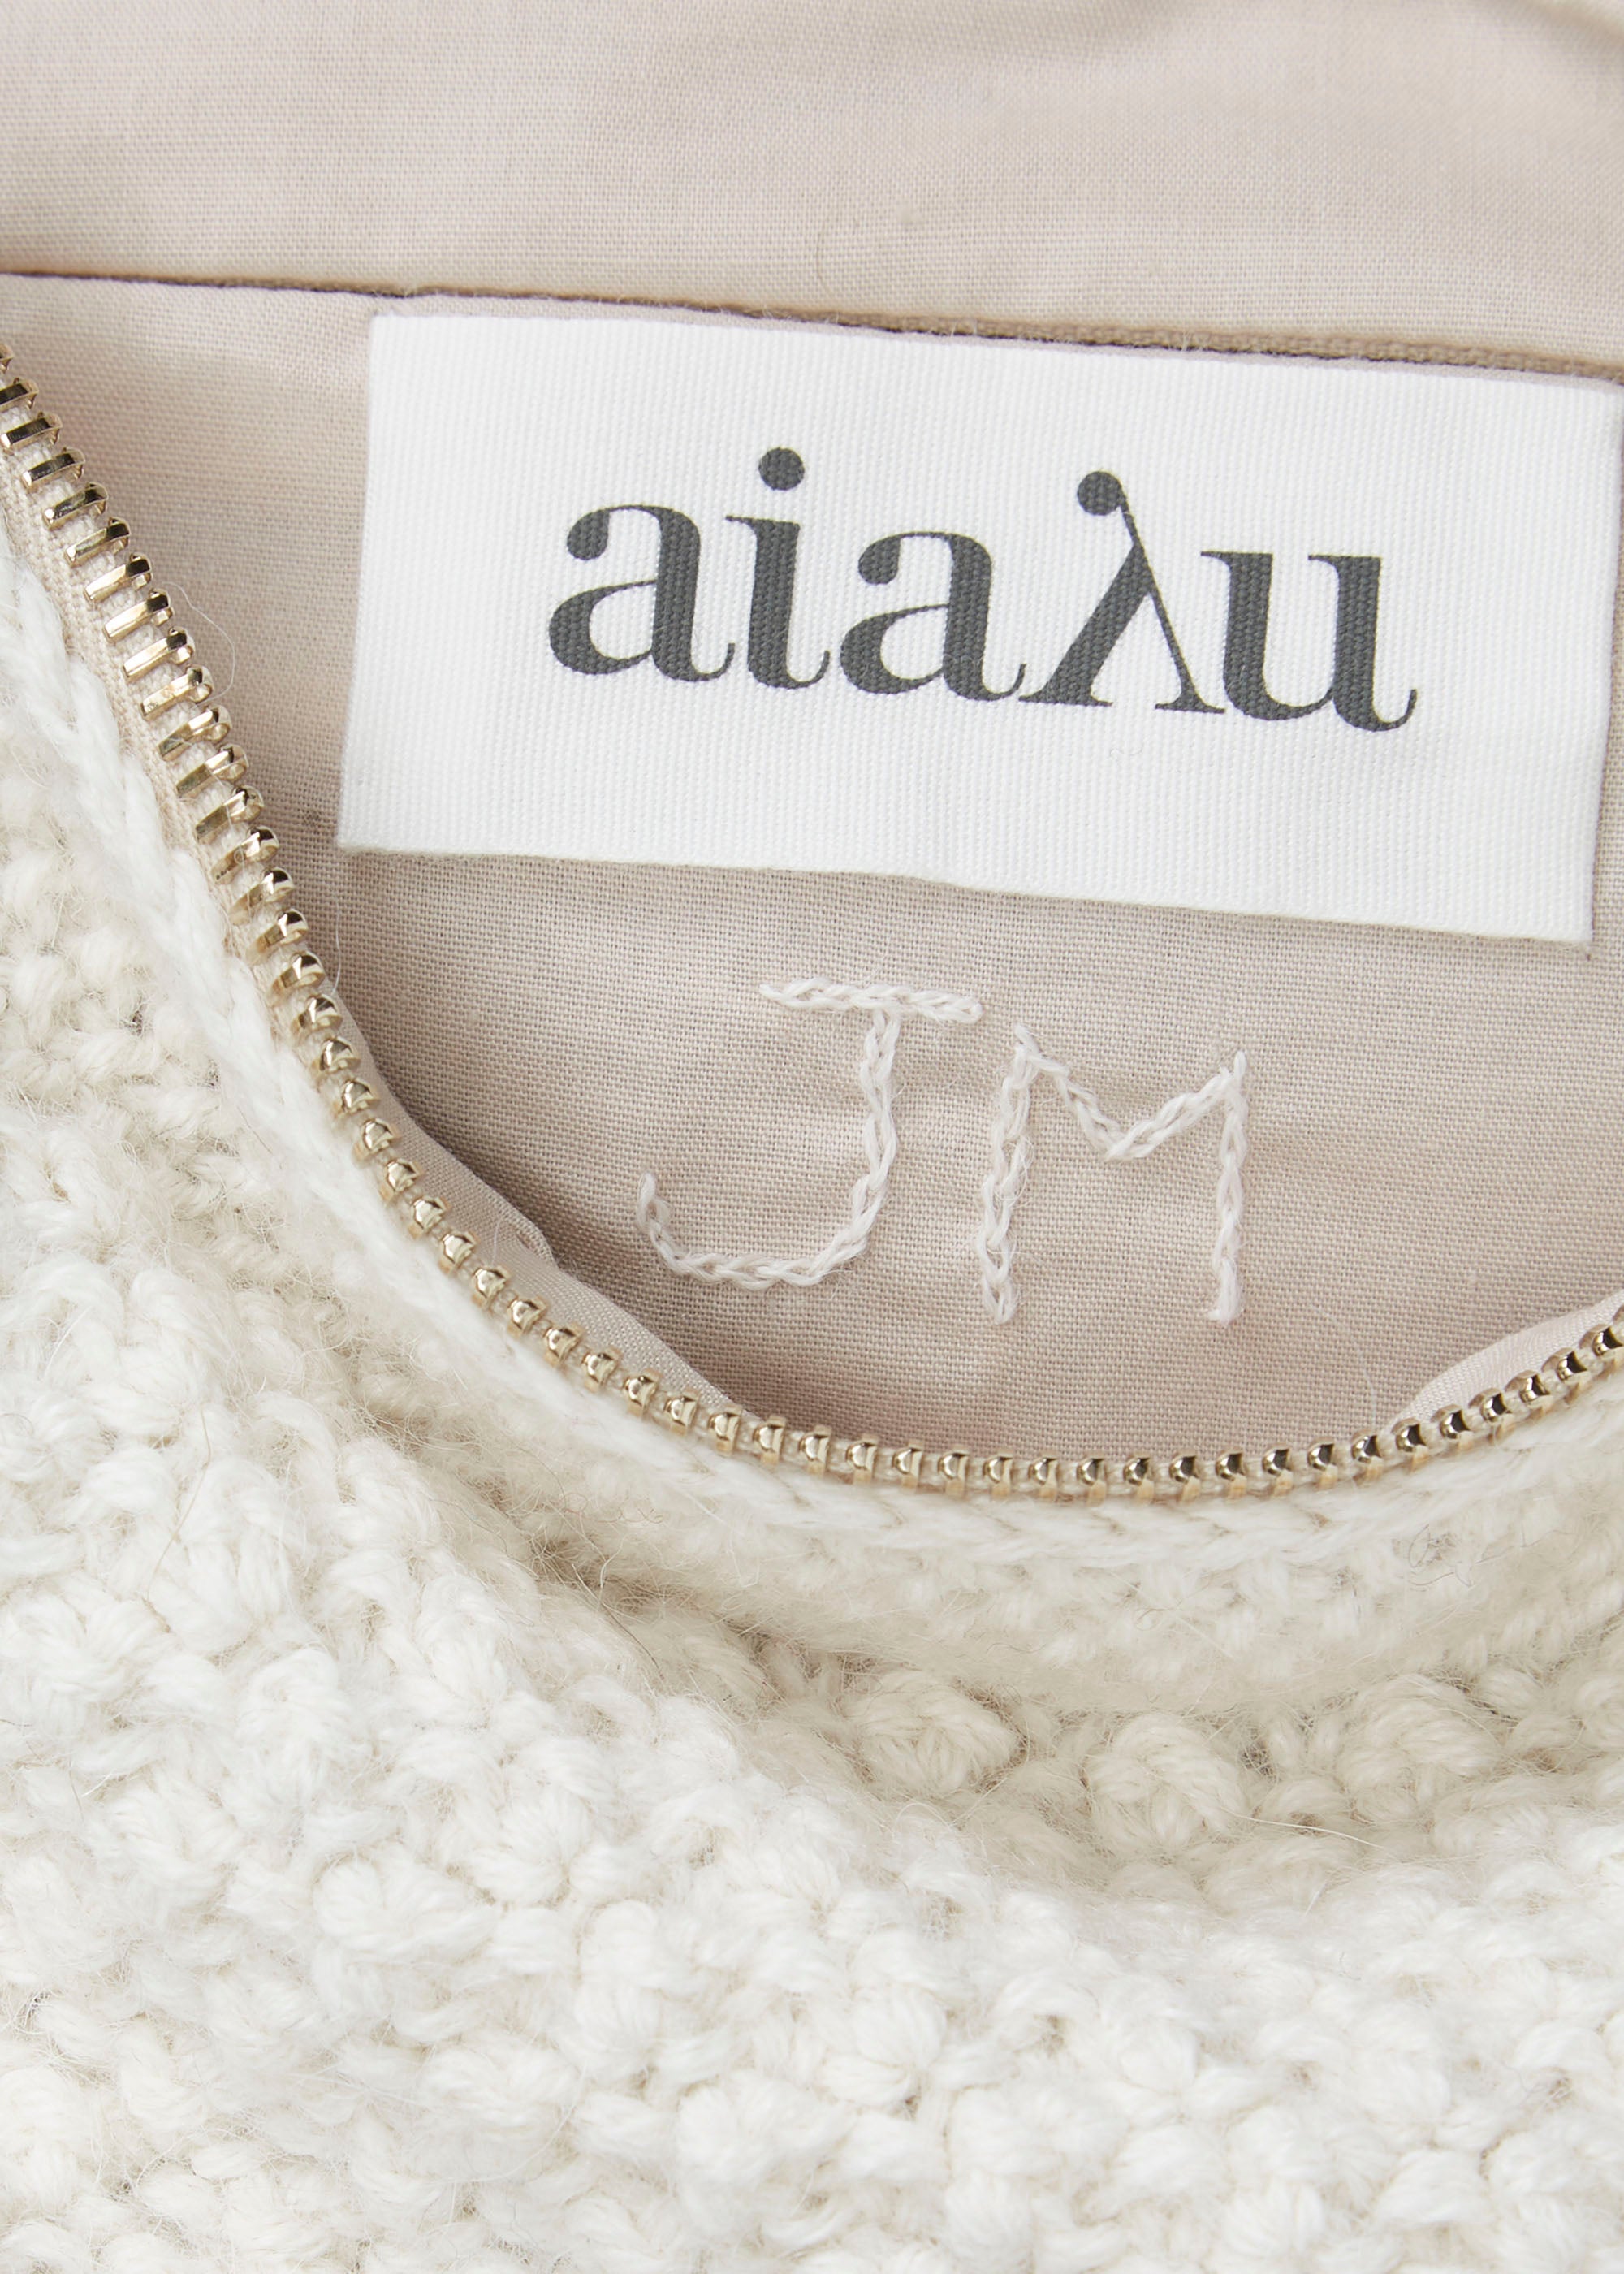 Embroidered initials of the woman who knitted the clutch.